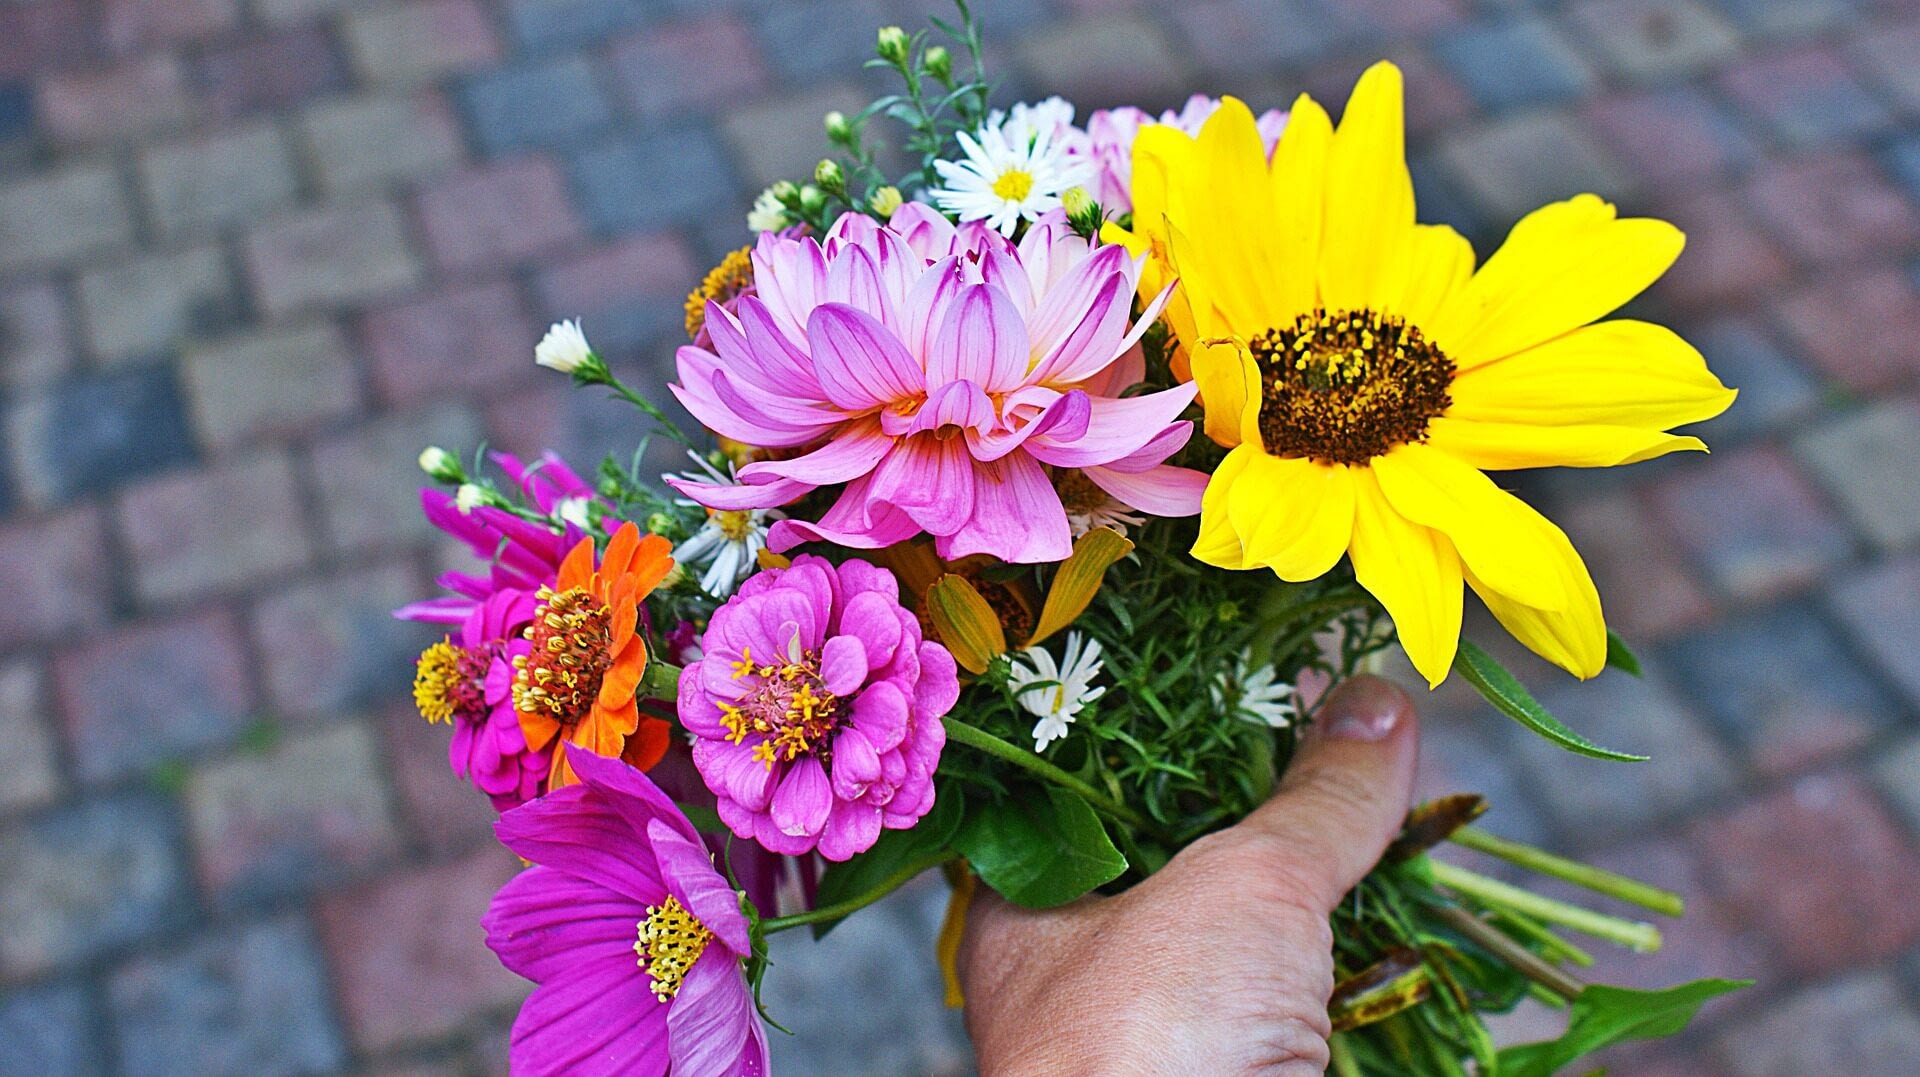 Image: Person holding flowers